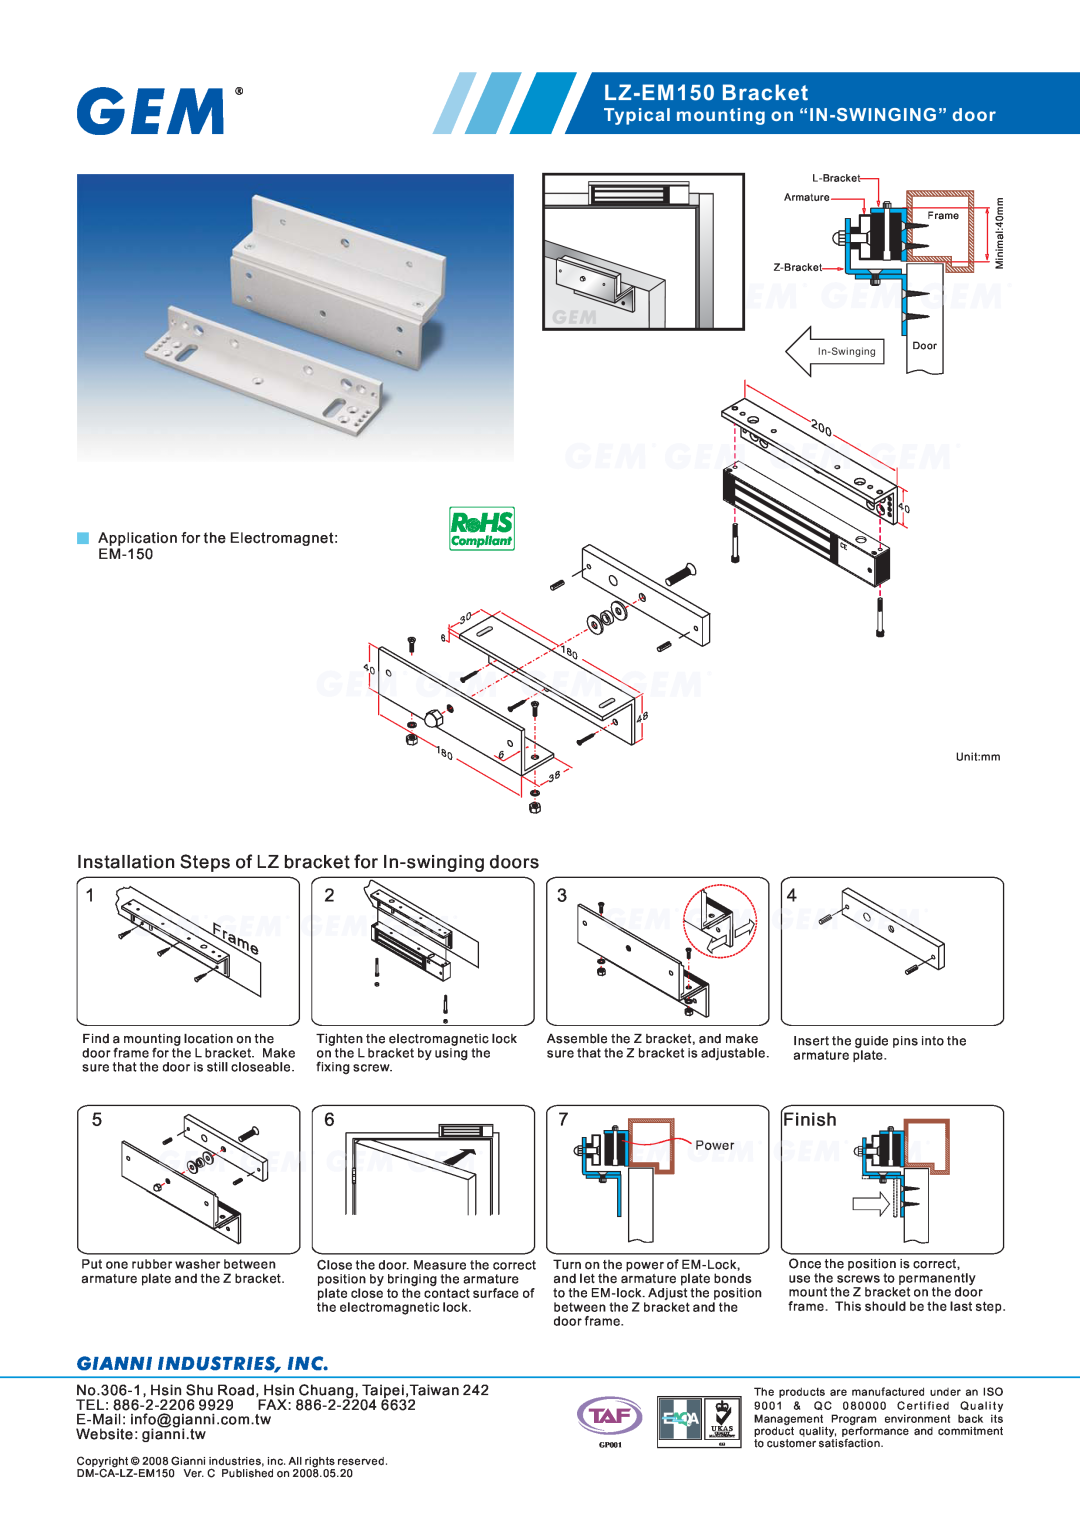 Gianni Industries manual LZ-EM150 Bracket, Typical mounting on “IN-SWINGING” door, Finish, Gianni Industries, Inc 